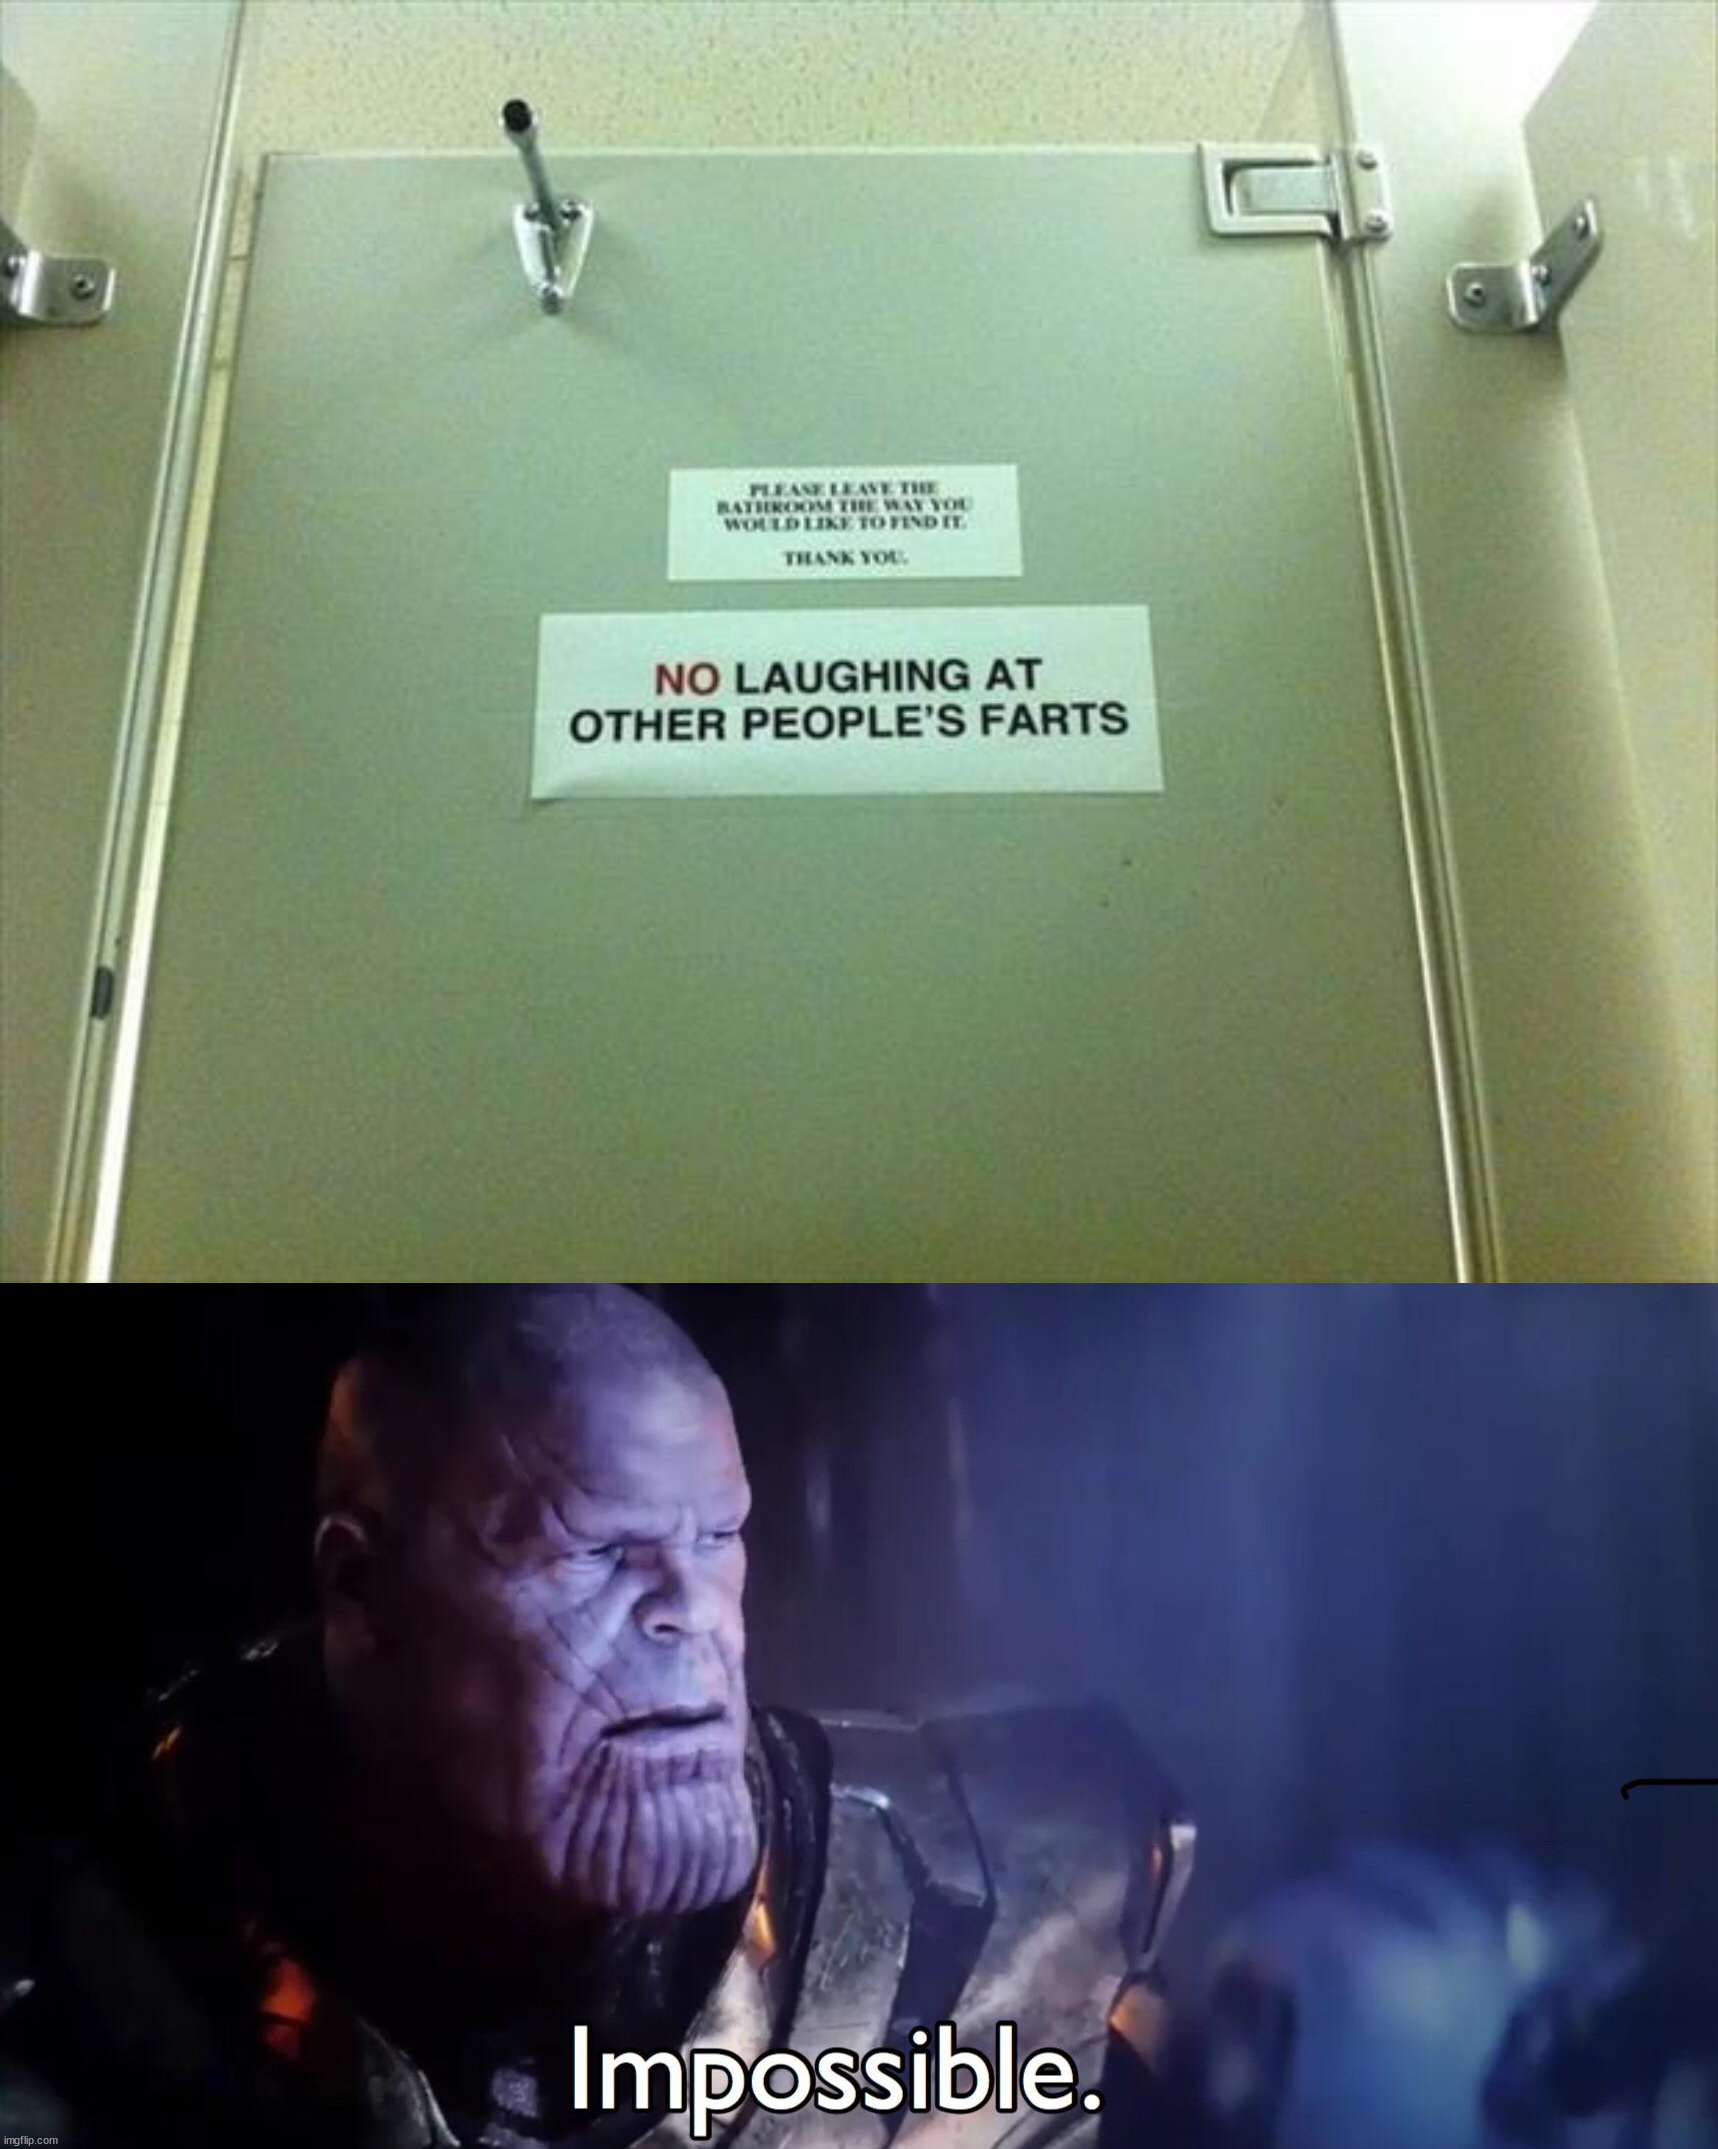 That is impossible so kick me out. | image tagged in thanos impossible,bathroom humor | made w/ Imgflip meme maker